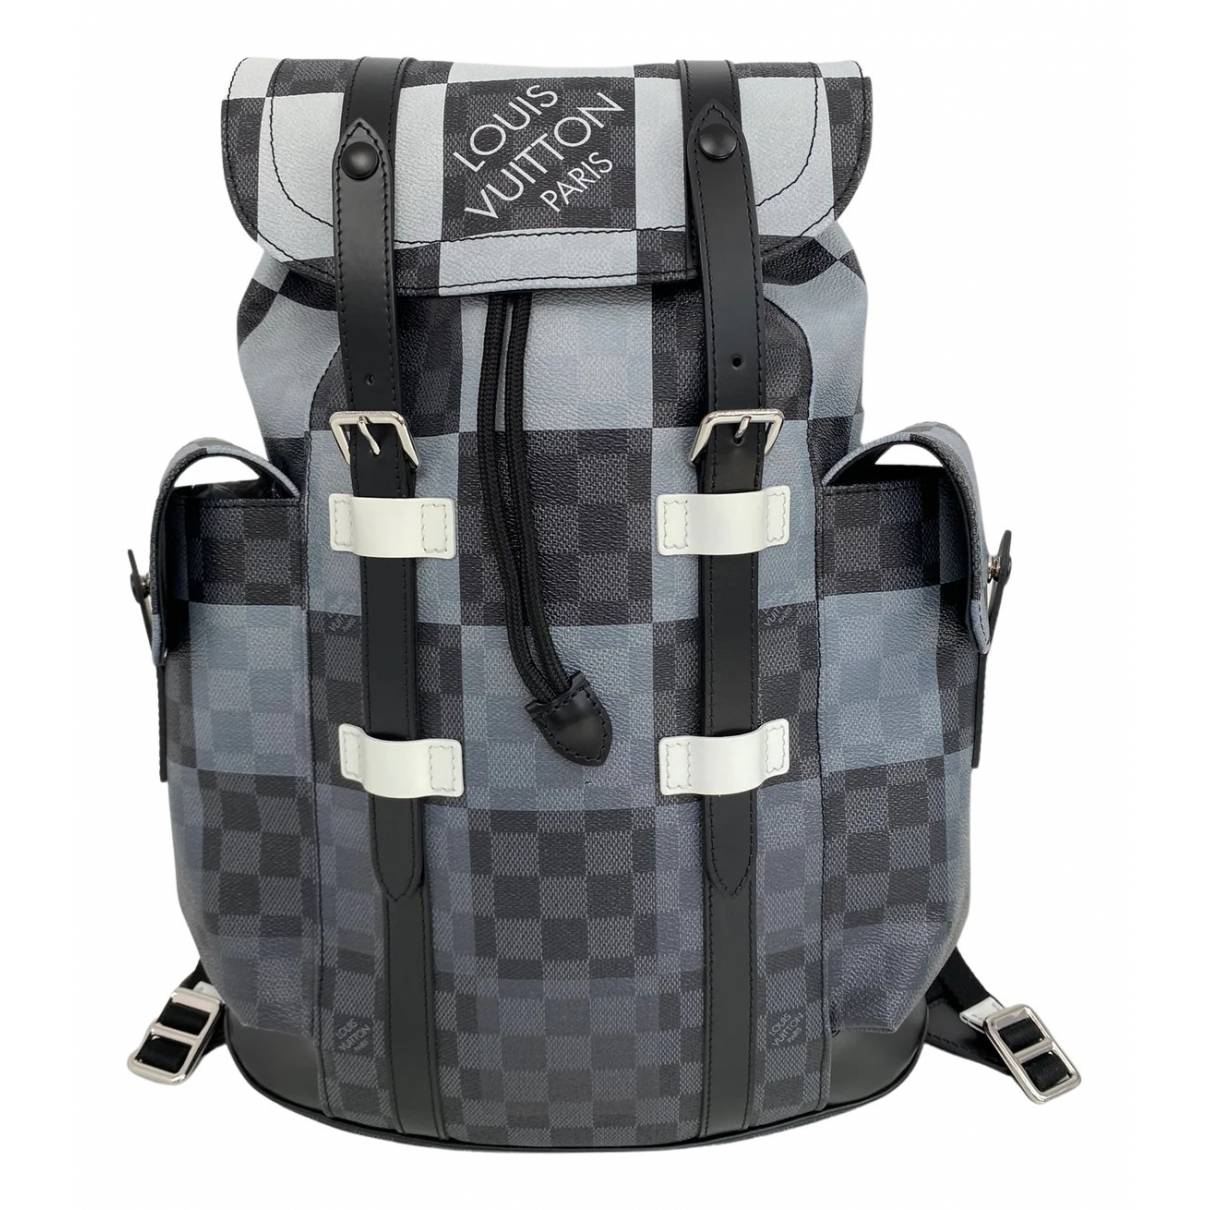 vuitton christopher backpack price